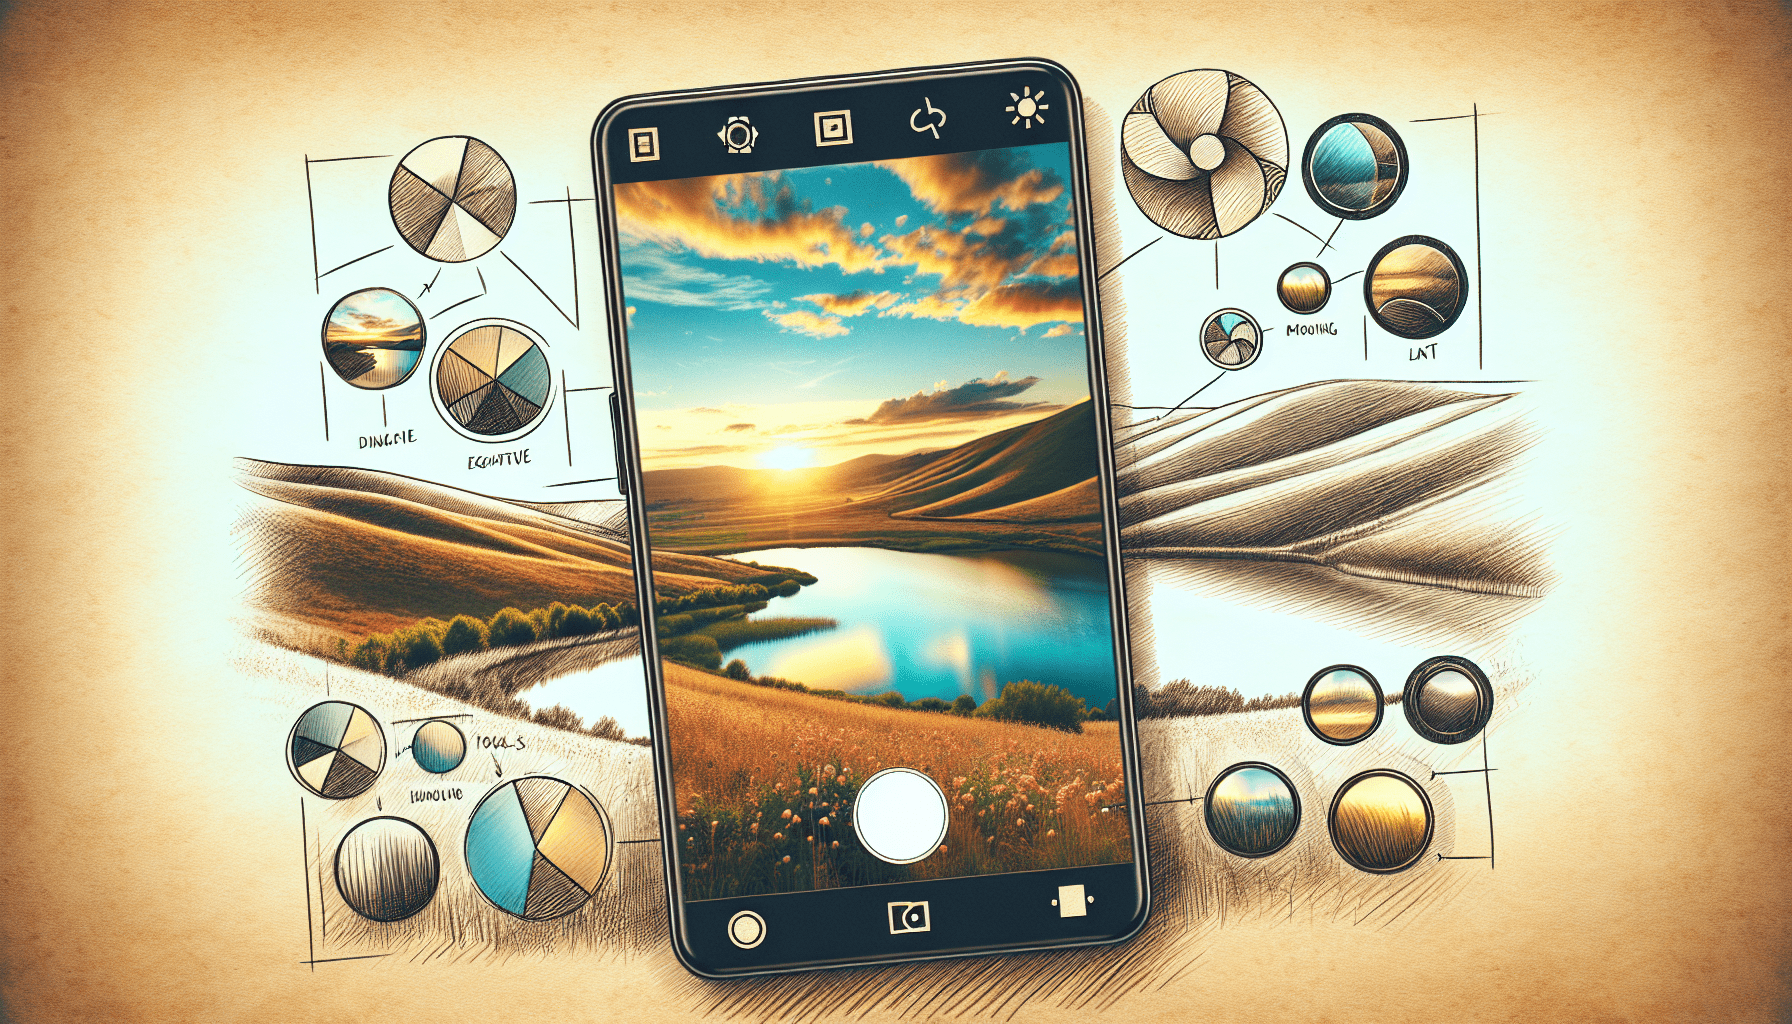 Monetize Your Skills: Strategies for Making Money with a Mobile Photography App